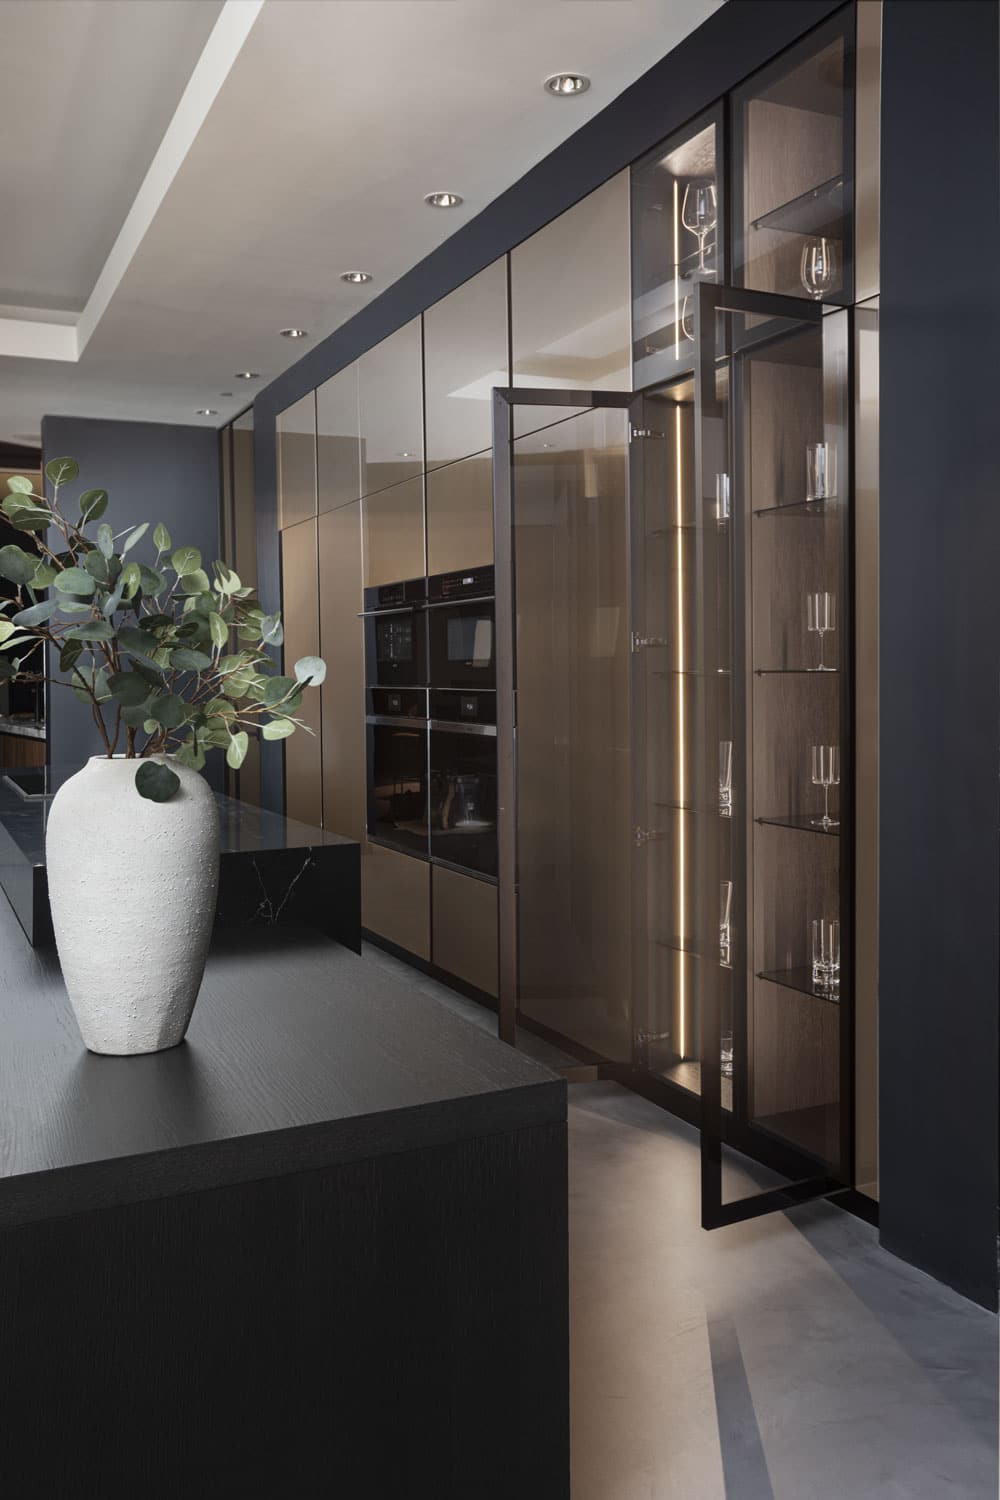 Tall cabinets with framed doors in smoked glass integrate within the pantry wall, creating an elegant display area. 